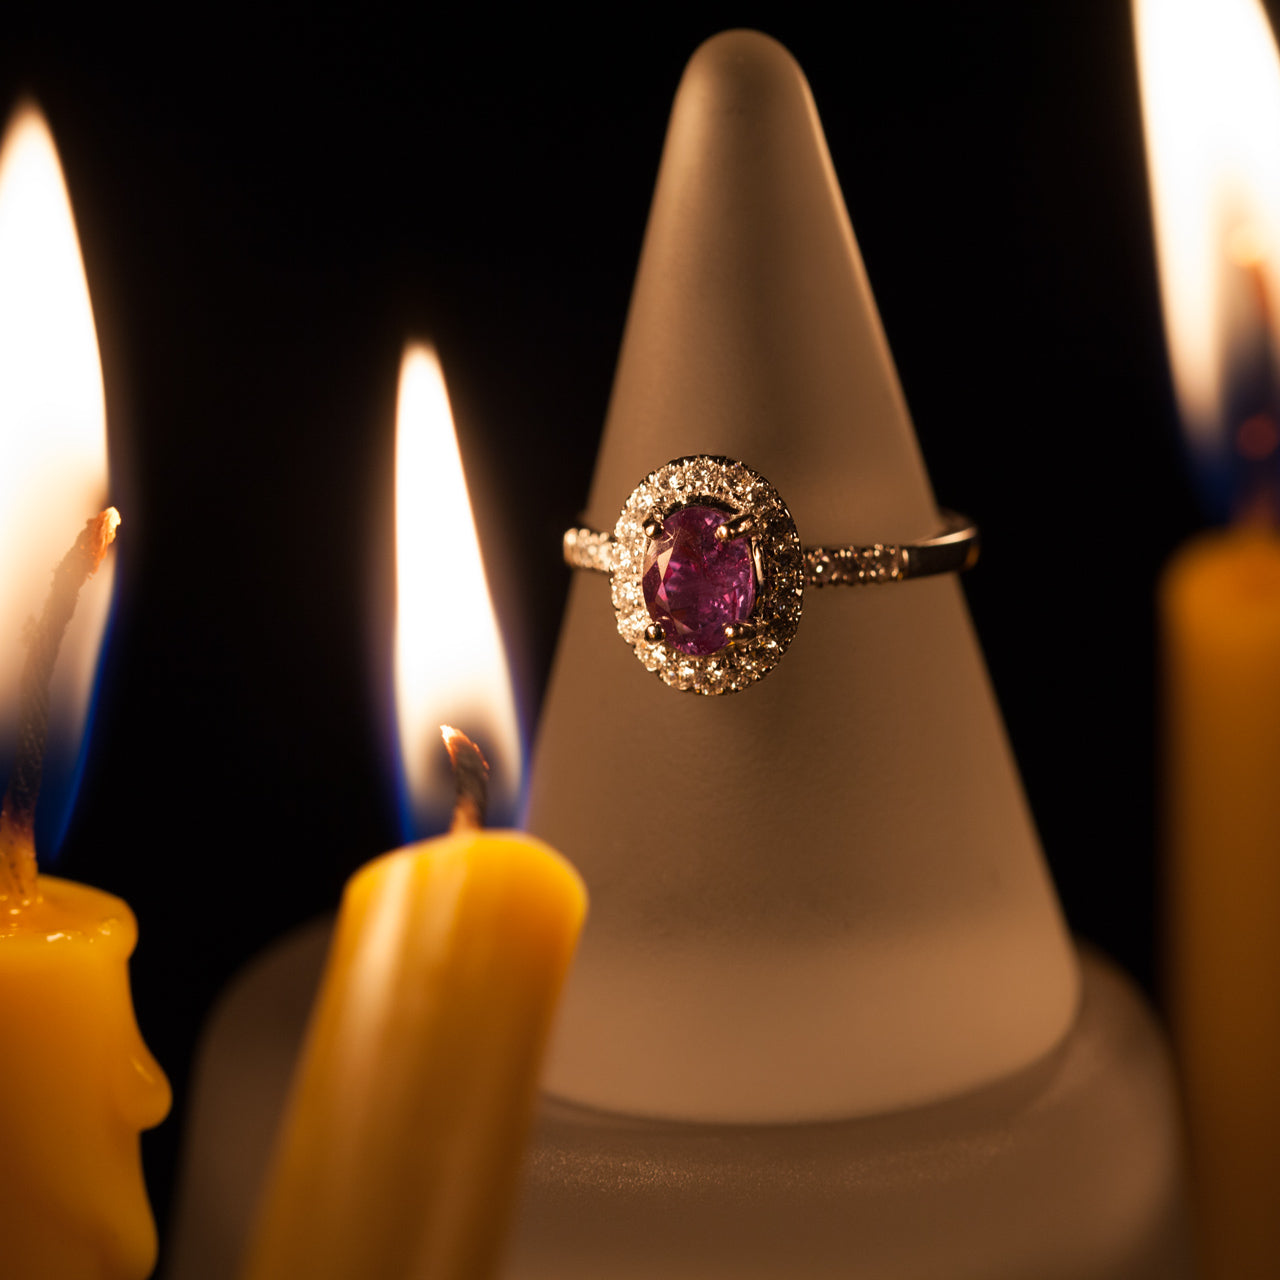 The 0.86ct natural alexandrite ring in 18k white gold showcased on a candle base